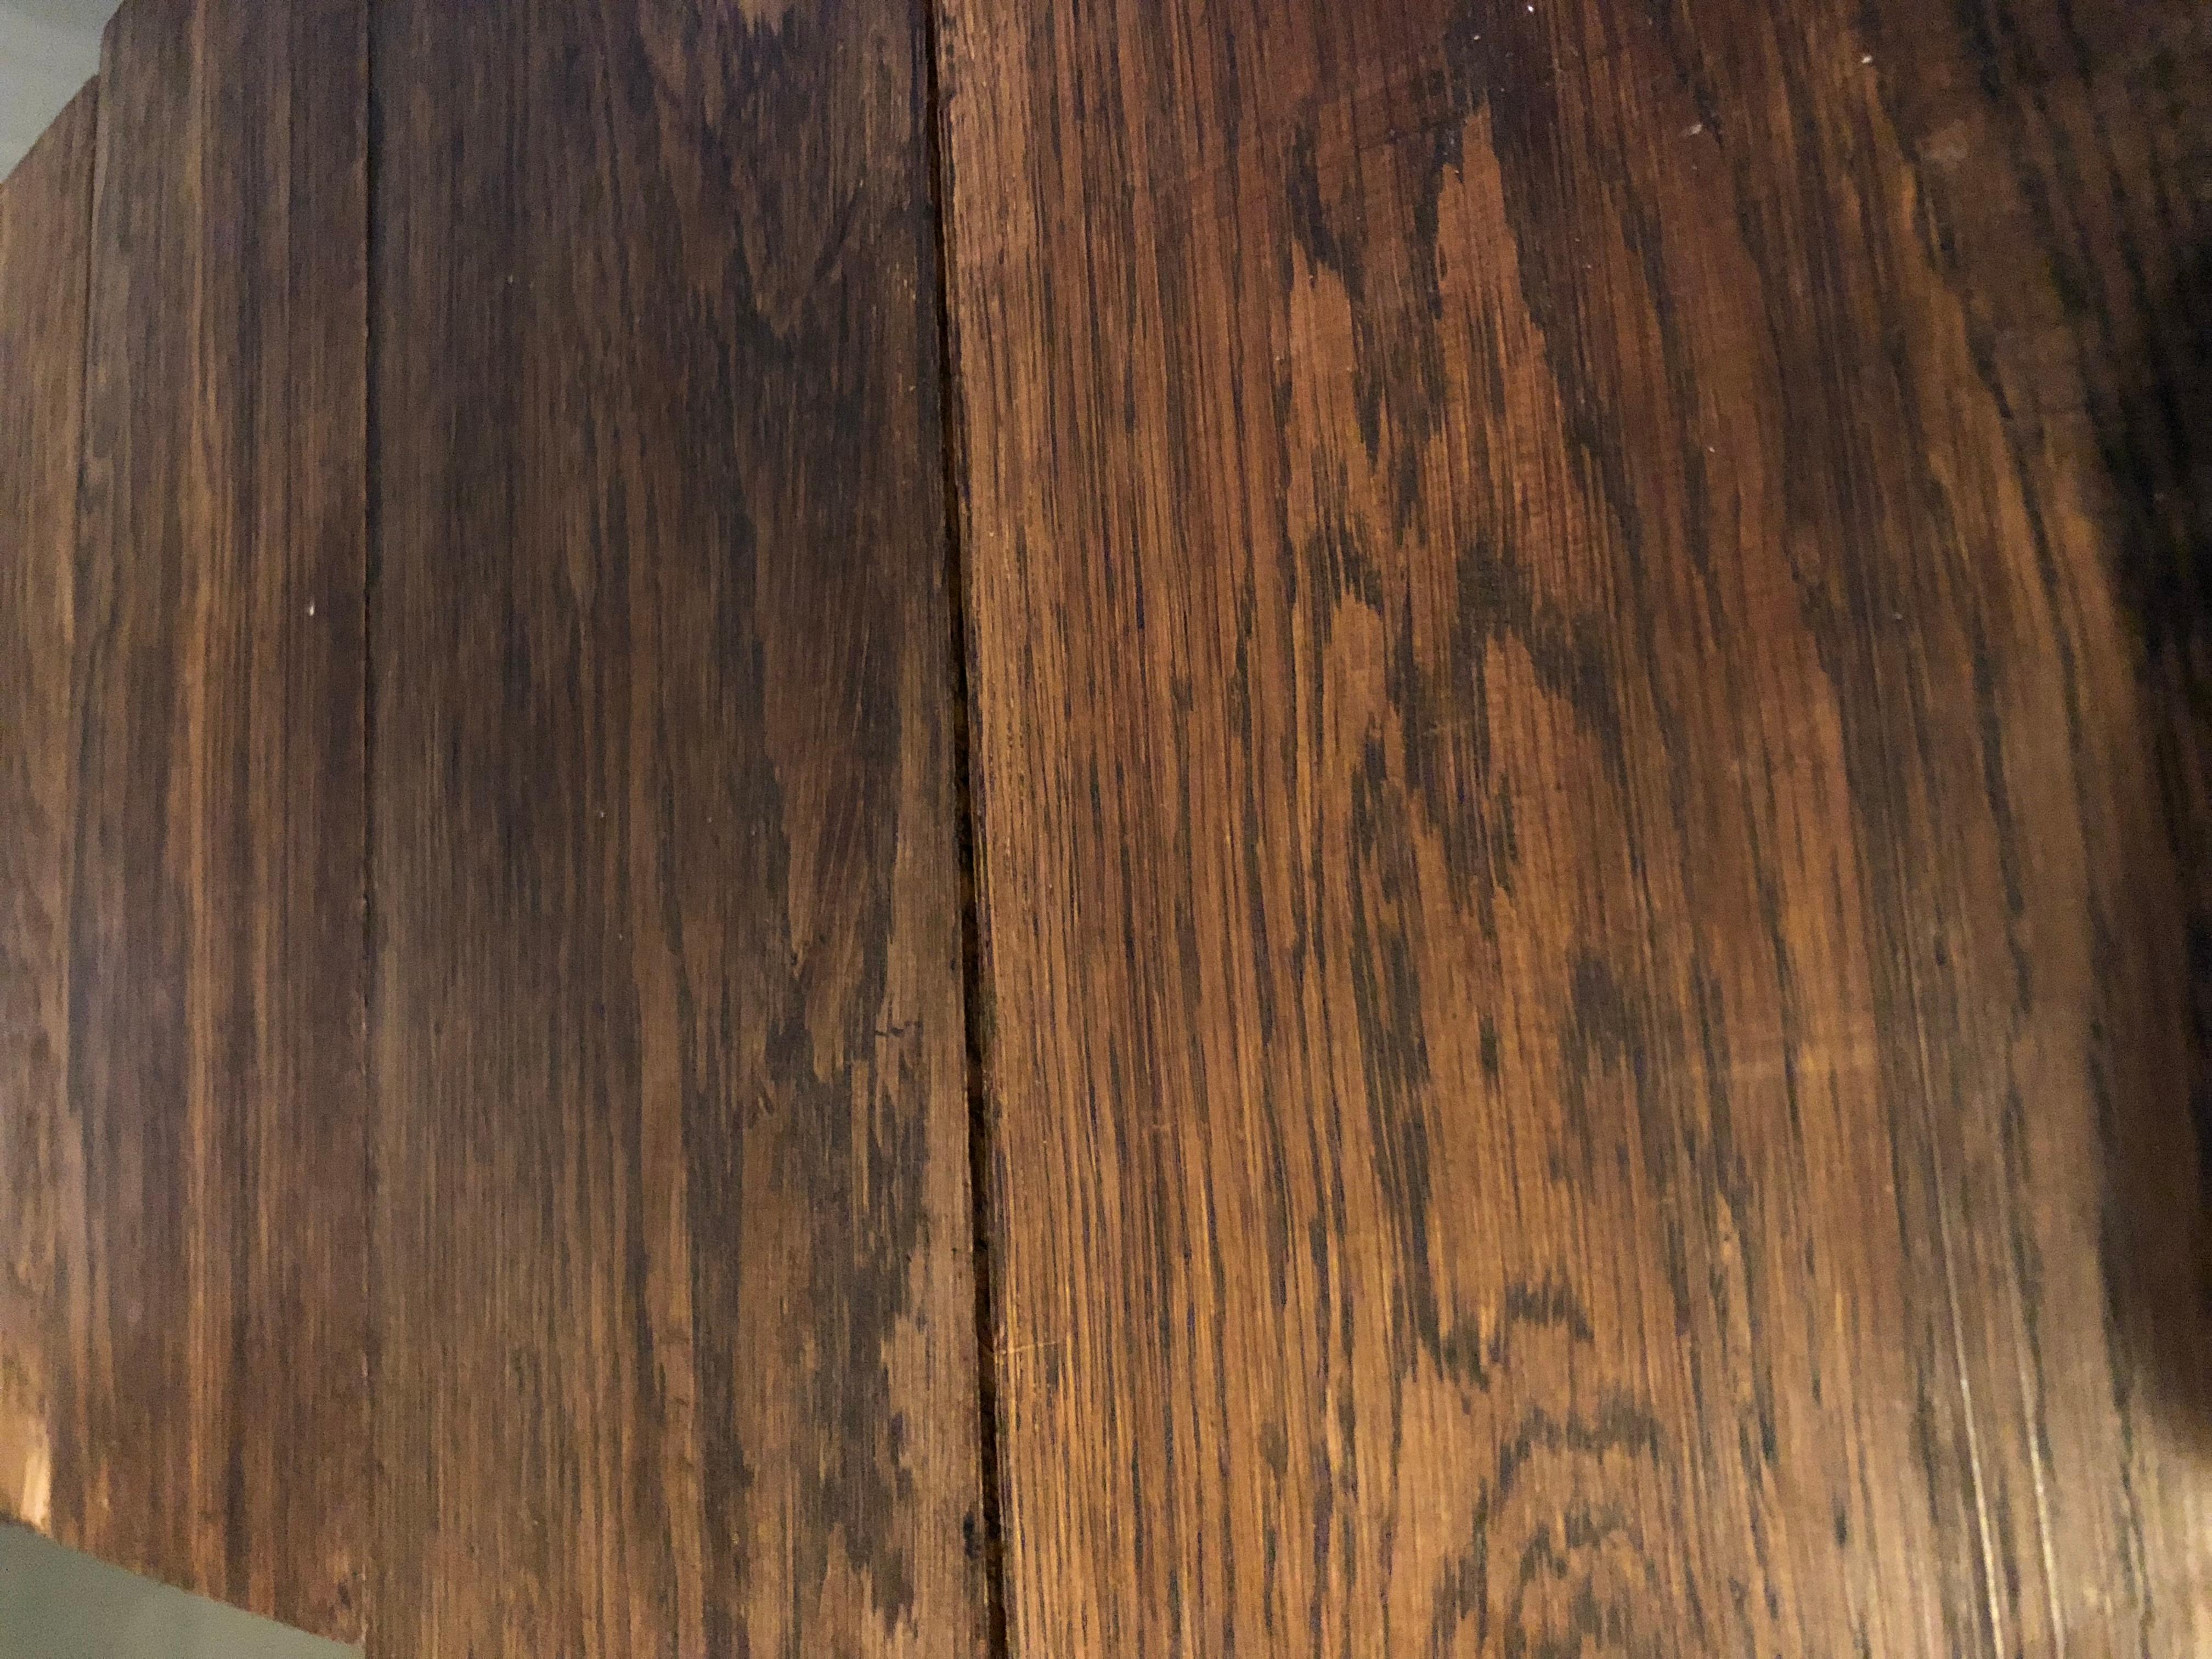 European Original French Antique Solid Wood Oak Floors 18th Century, France For Sale